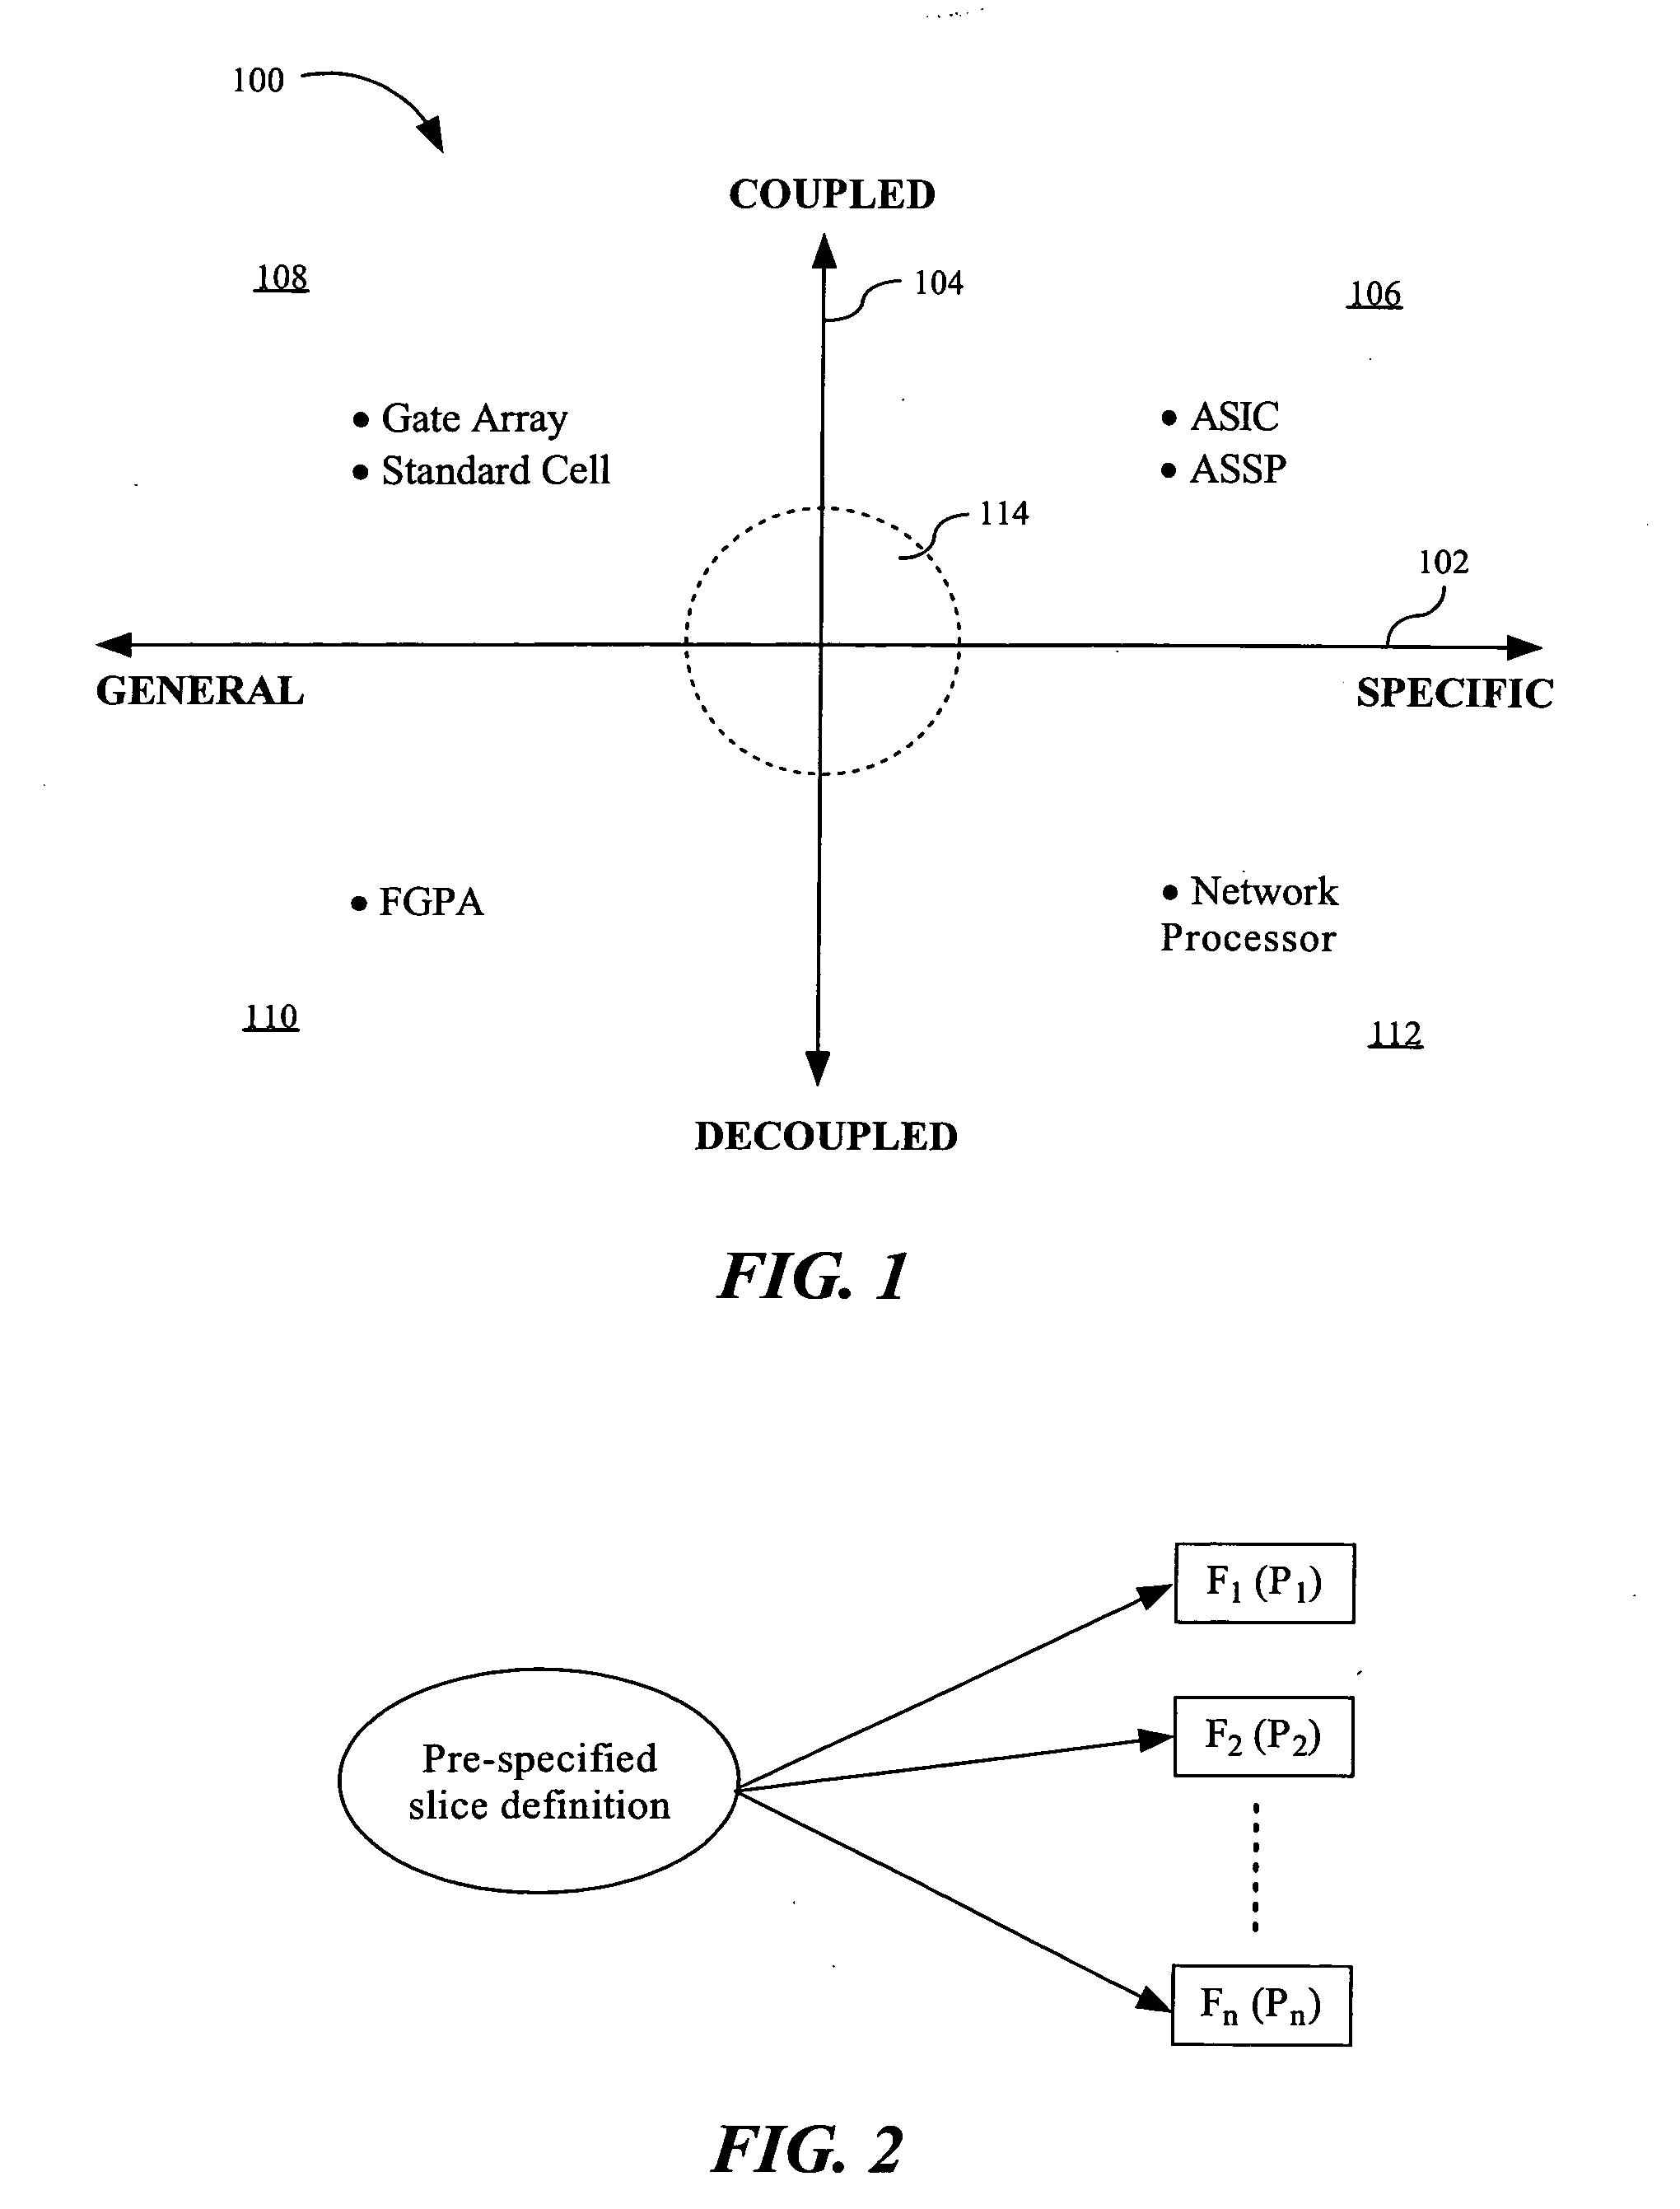 Method and apparatus for mapping platform-based design to multiple foundry processes